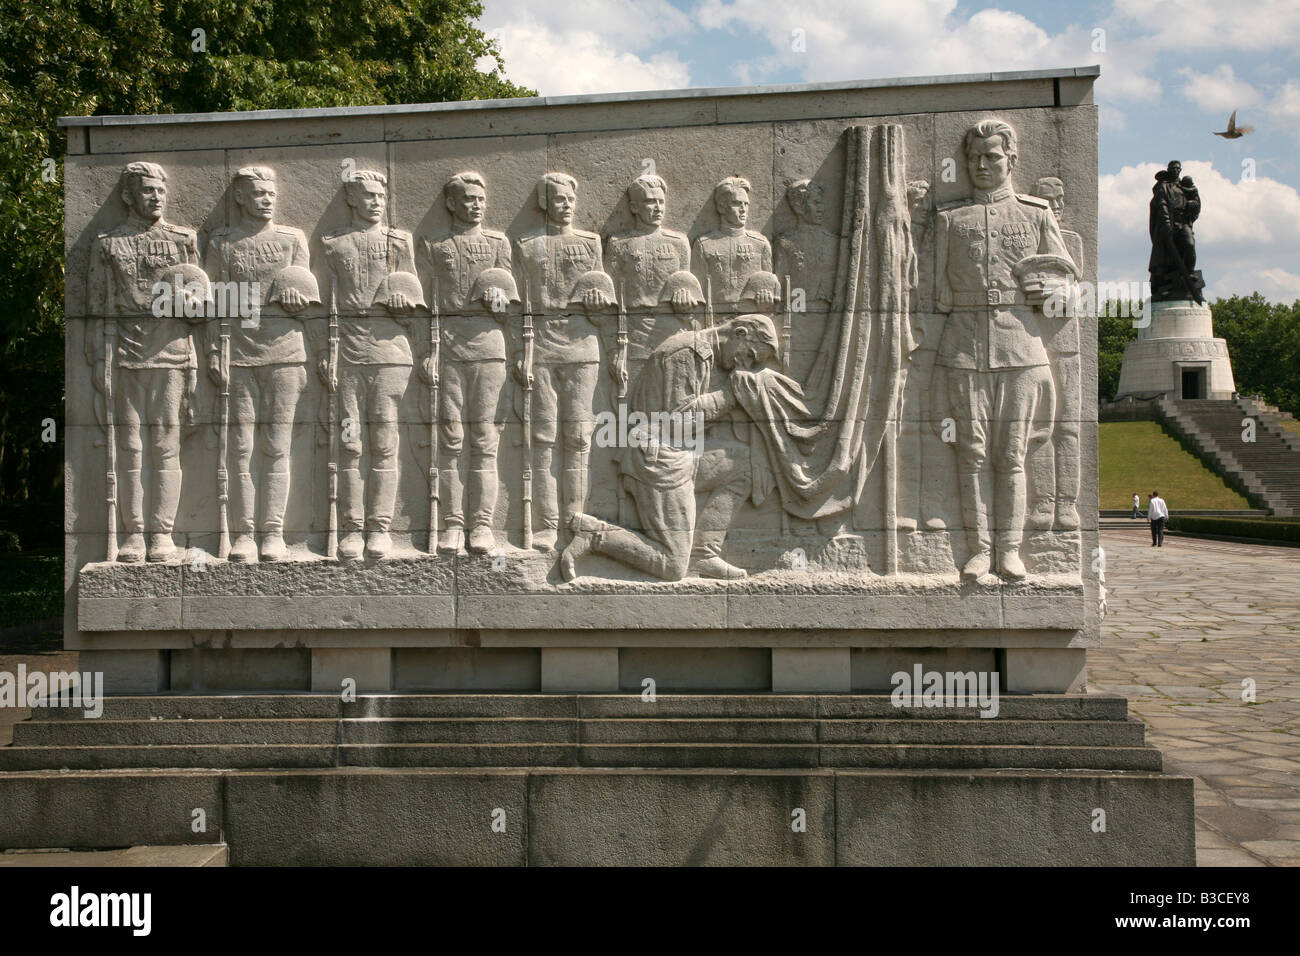 Marble stele from the Soviet War Memorial at Treptow Park in Berlin, Germany Stock Photo